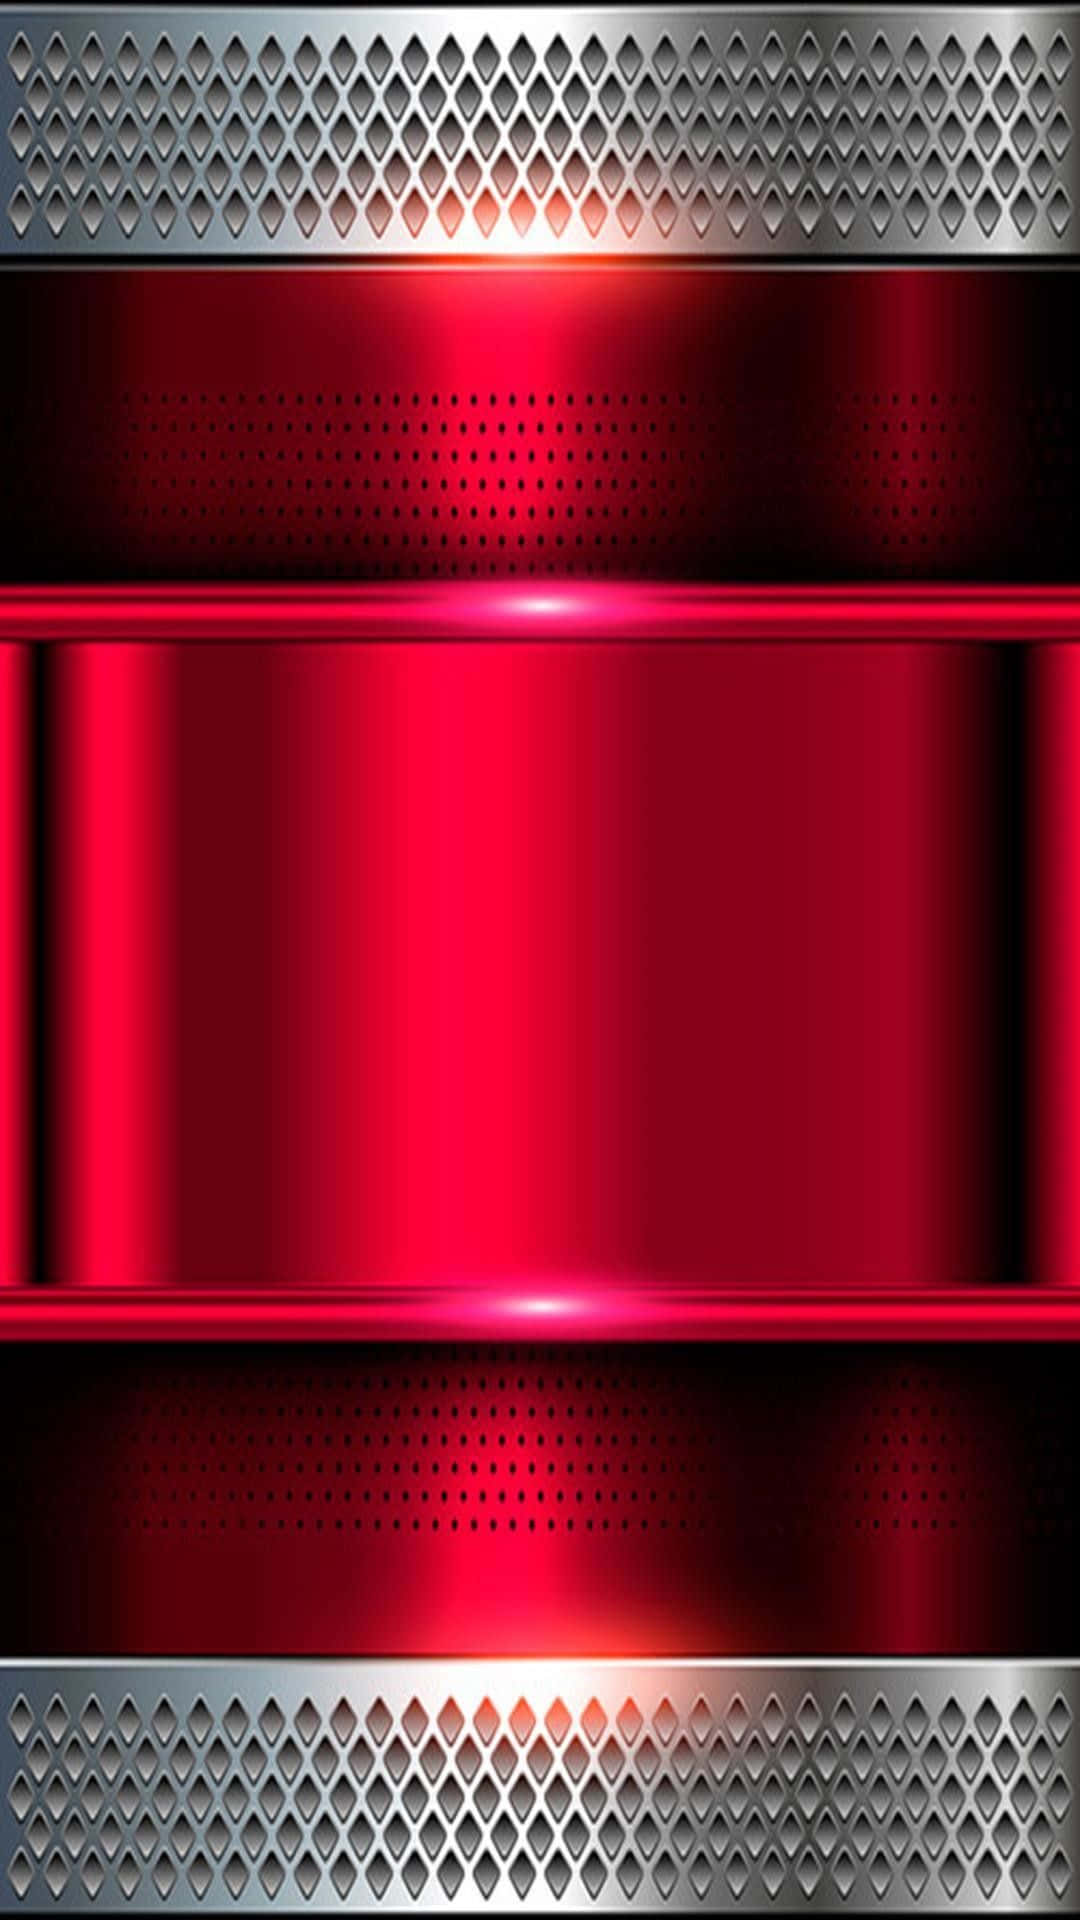 Metallic red background with sparkling silver details